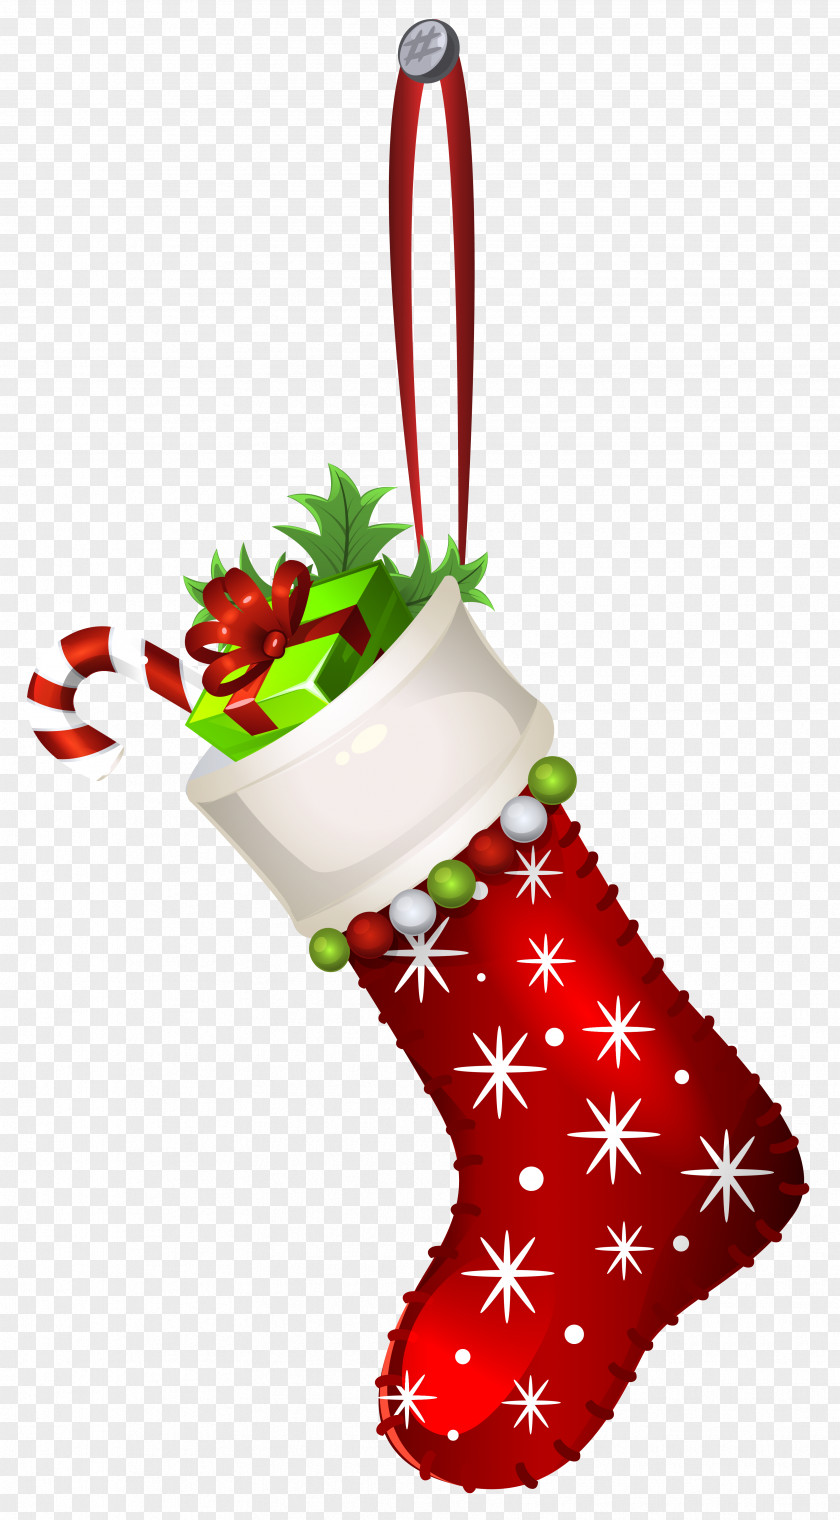 Socks Candy Cane Christmas Decoration Stockings Clip Art PNG